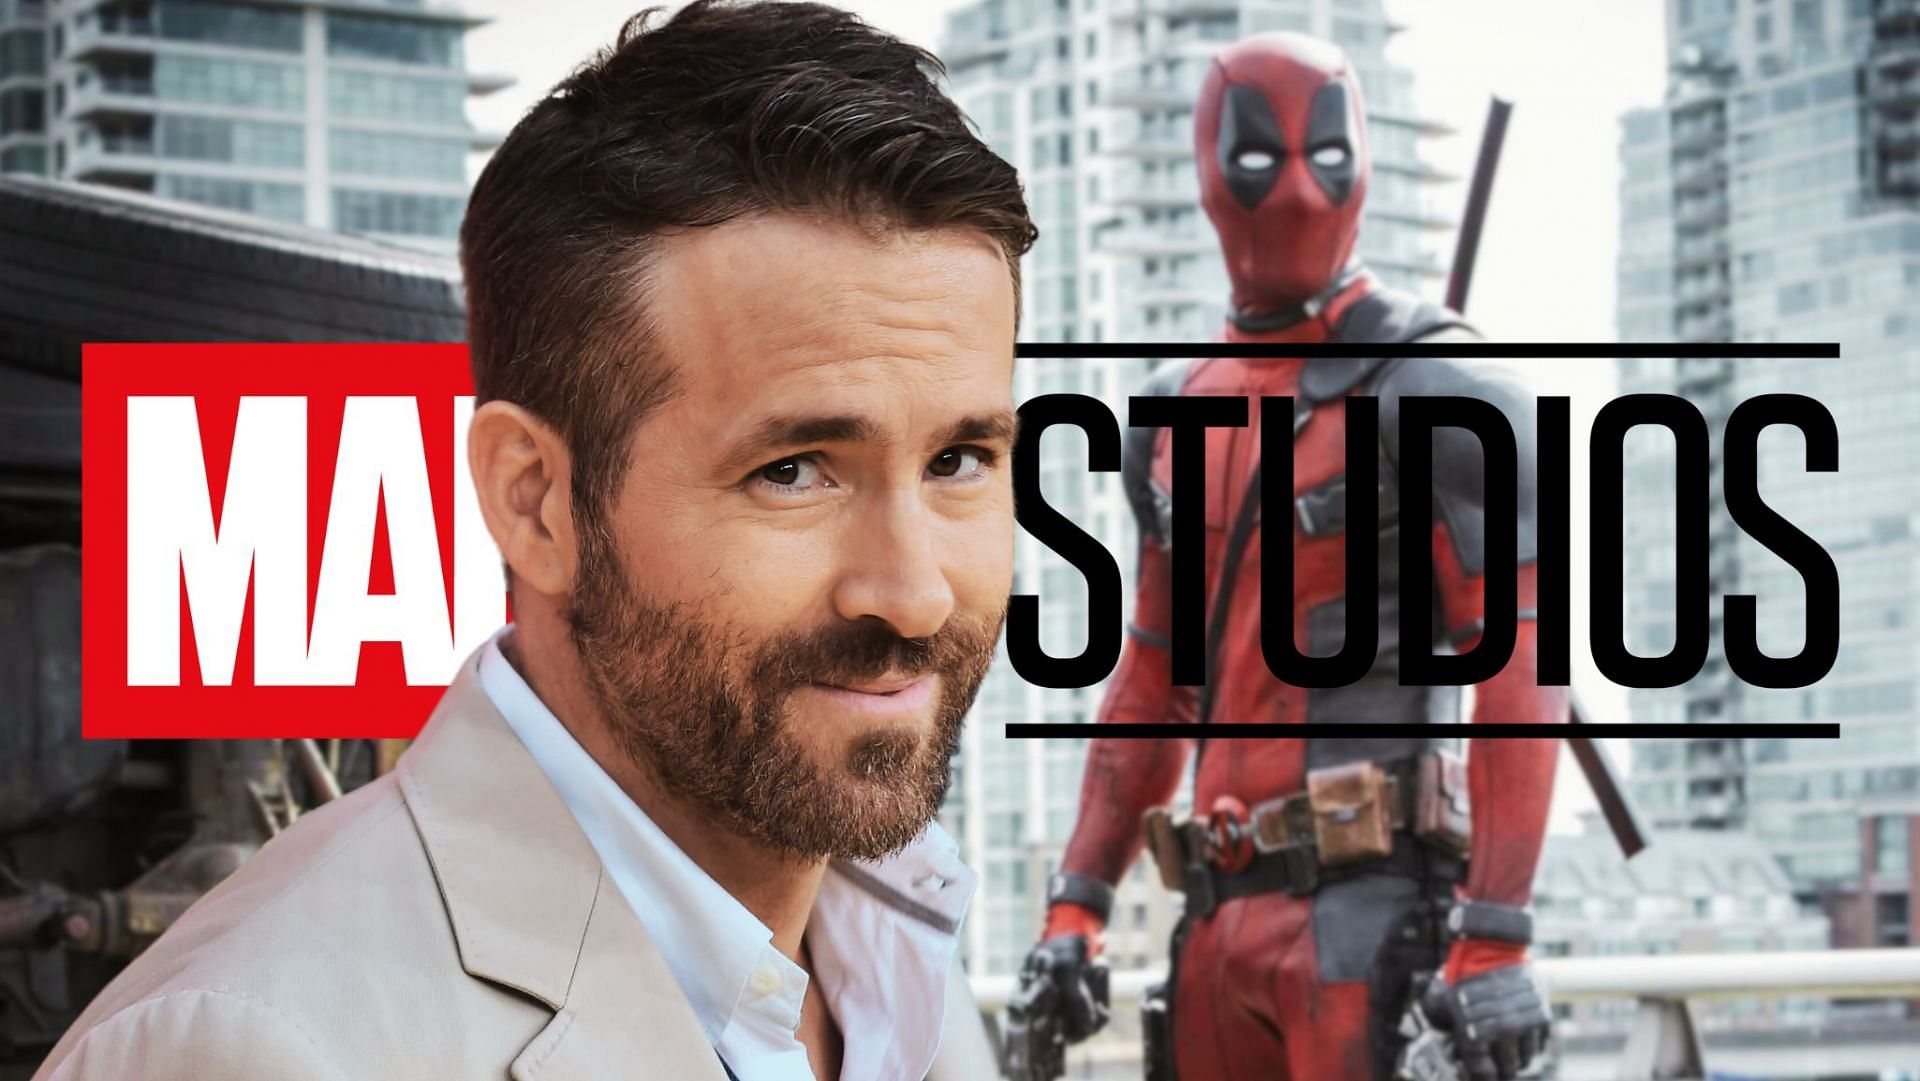 Rob Liefeld, the creator of Deadpool, provides reassurance about Ryan Reynolds